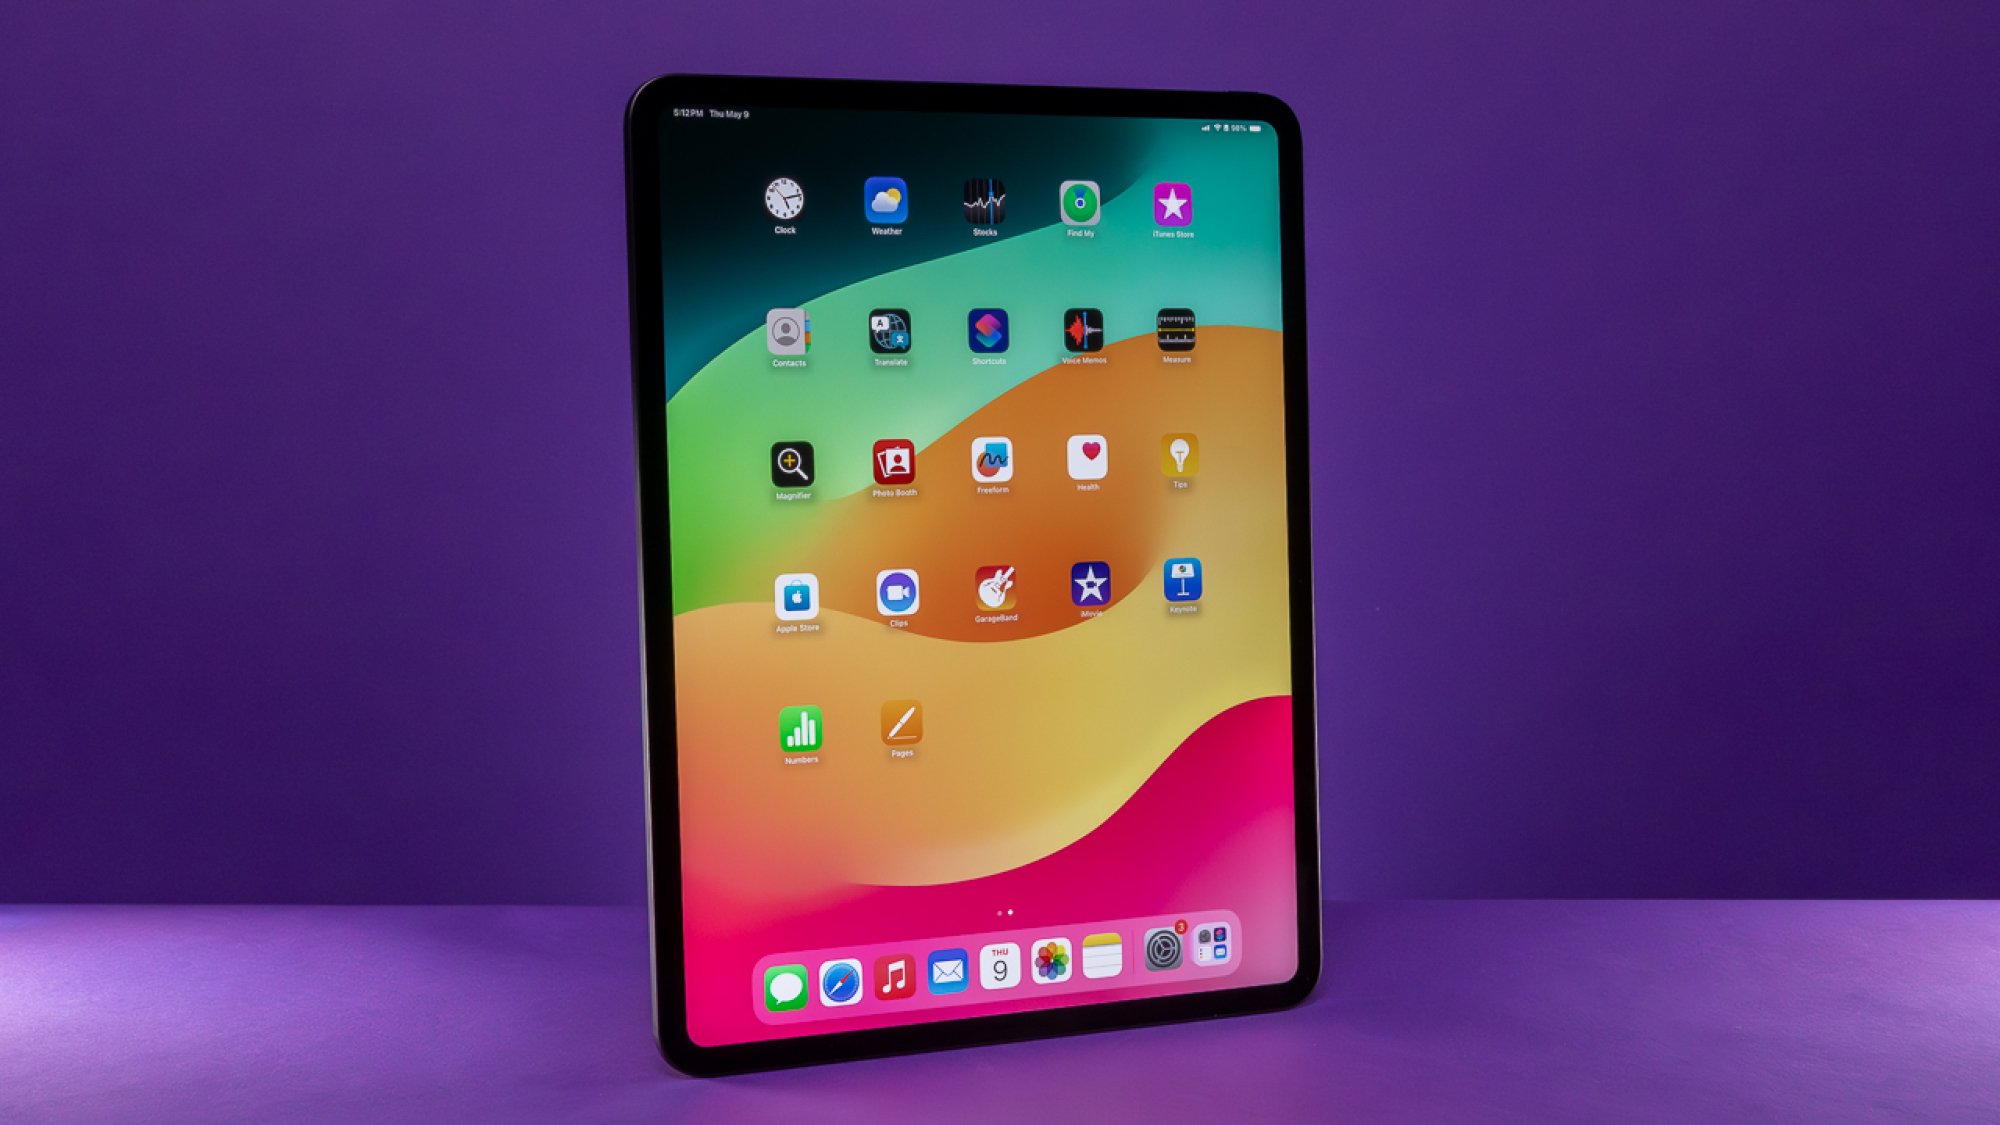 13-inch iPad Pro in front of a purple background and slightly tilted